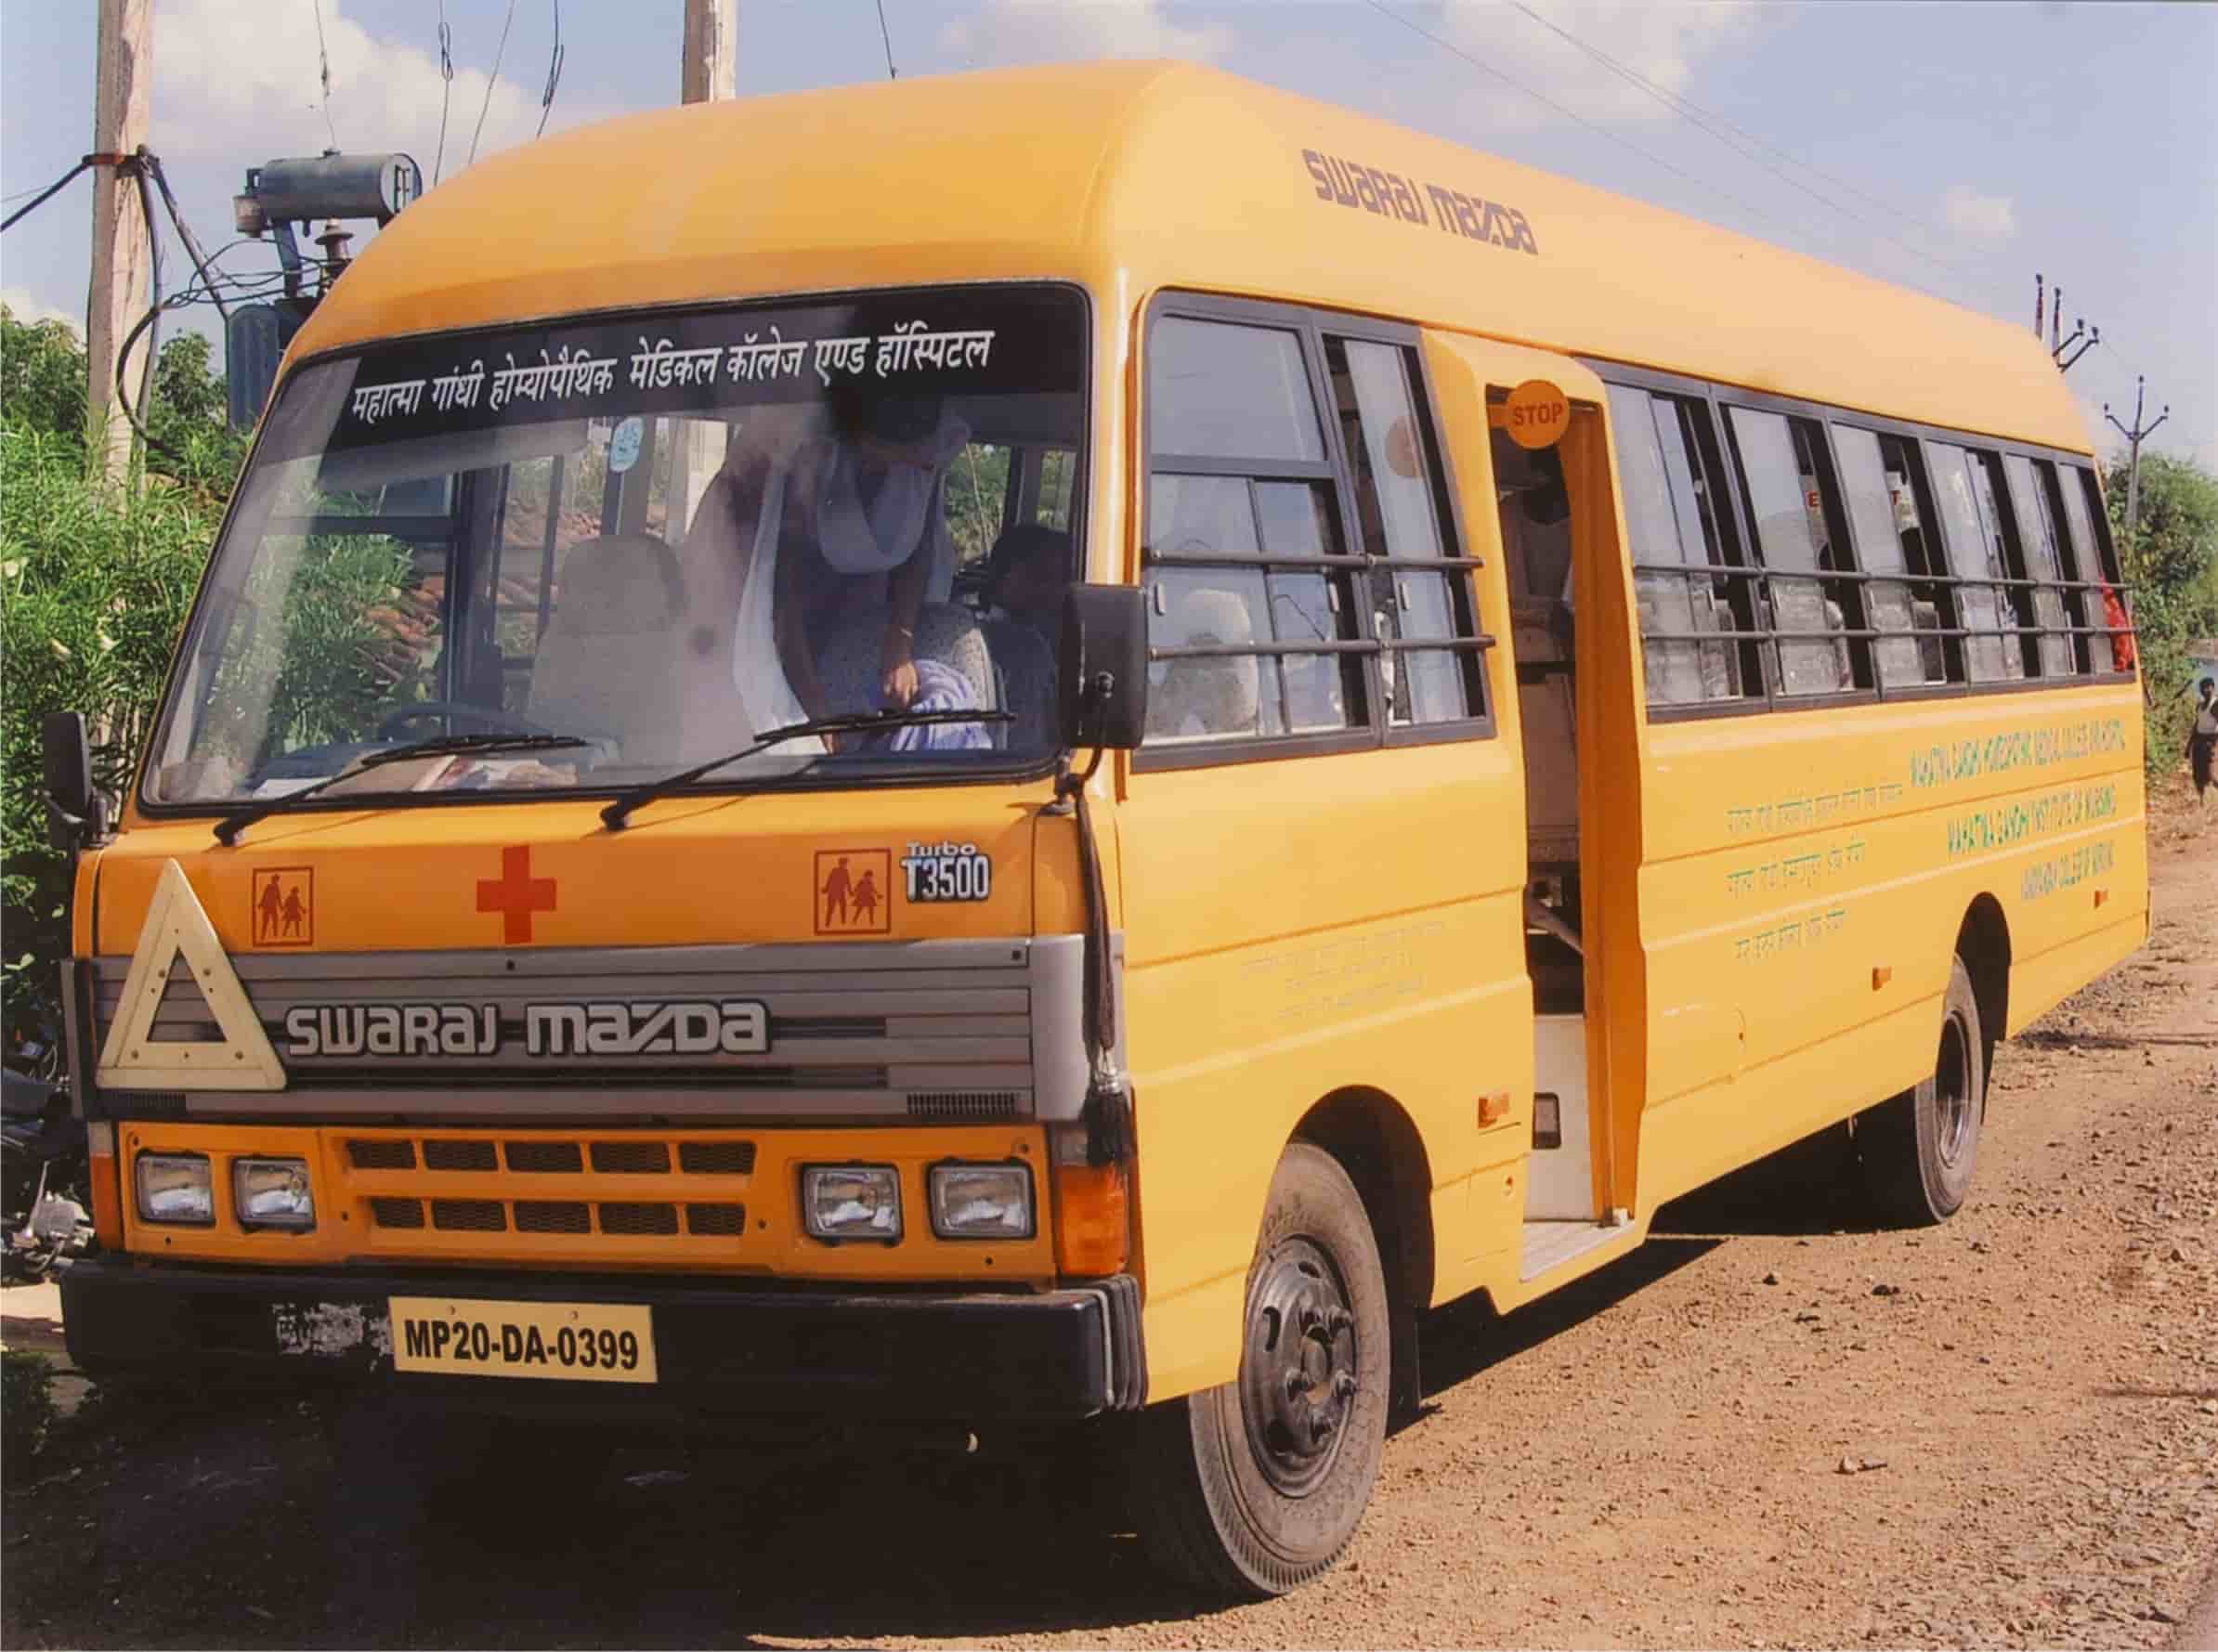 An image of a yellow bus.